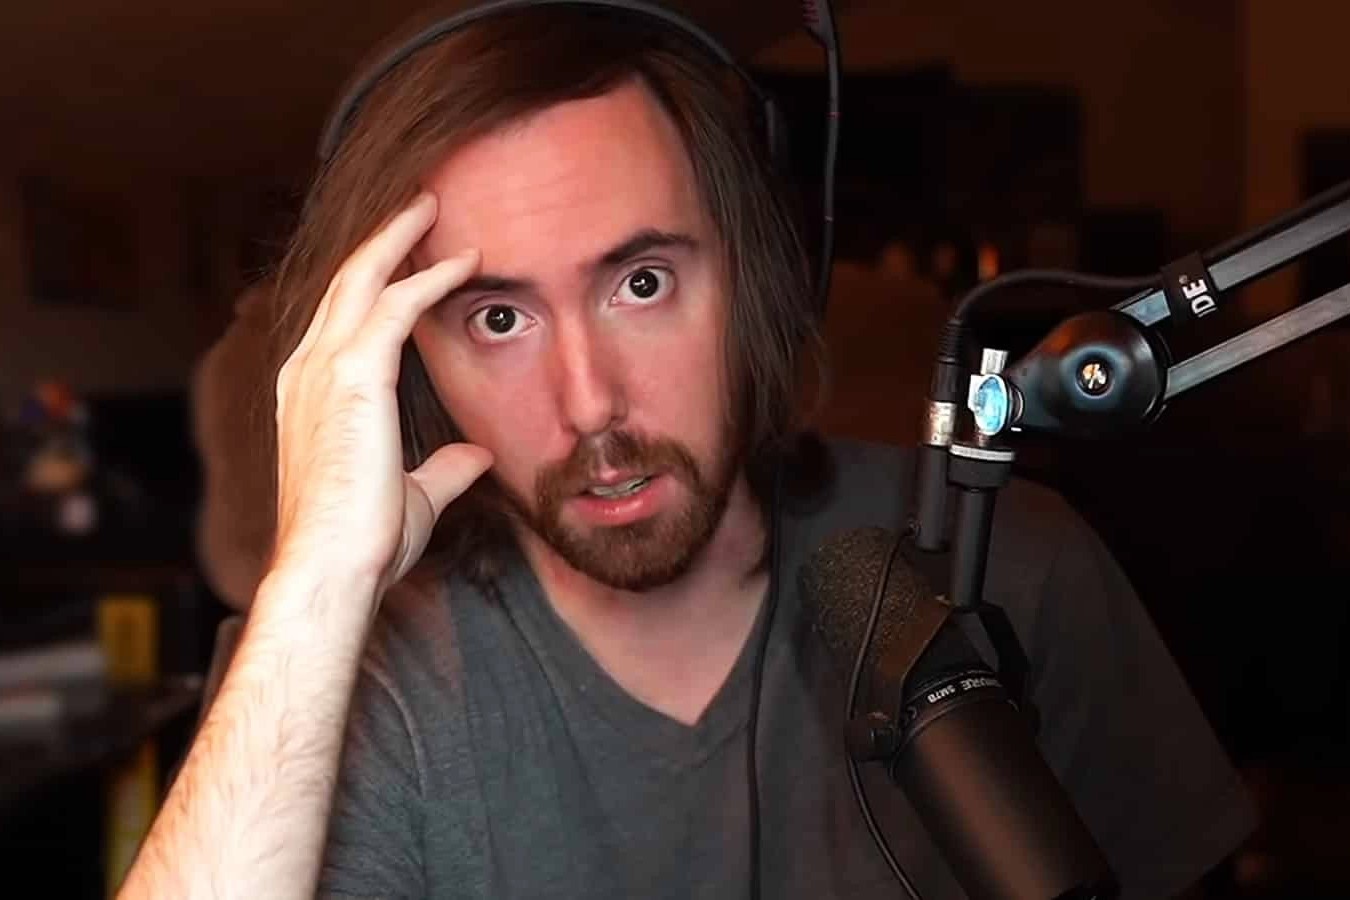 9 Extraordinary Facts About Asmongold - Facts.net